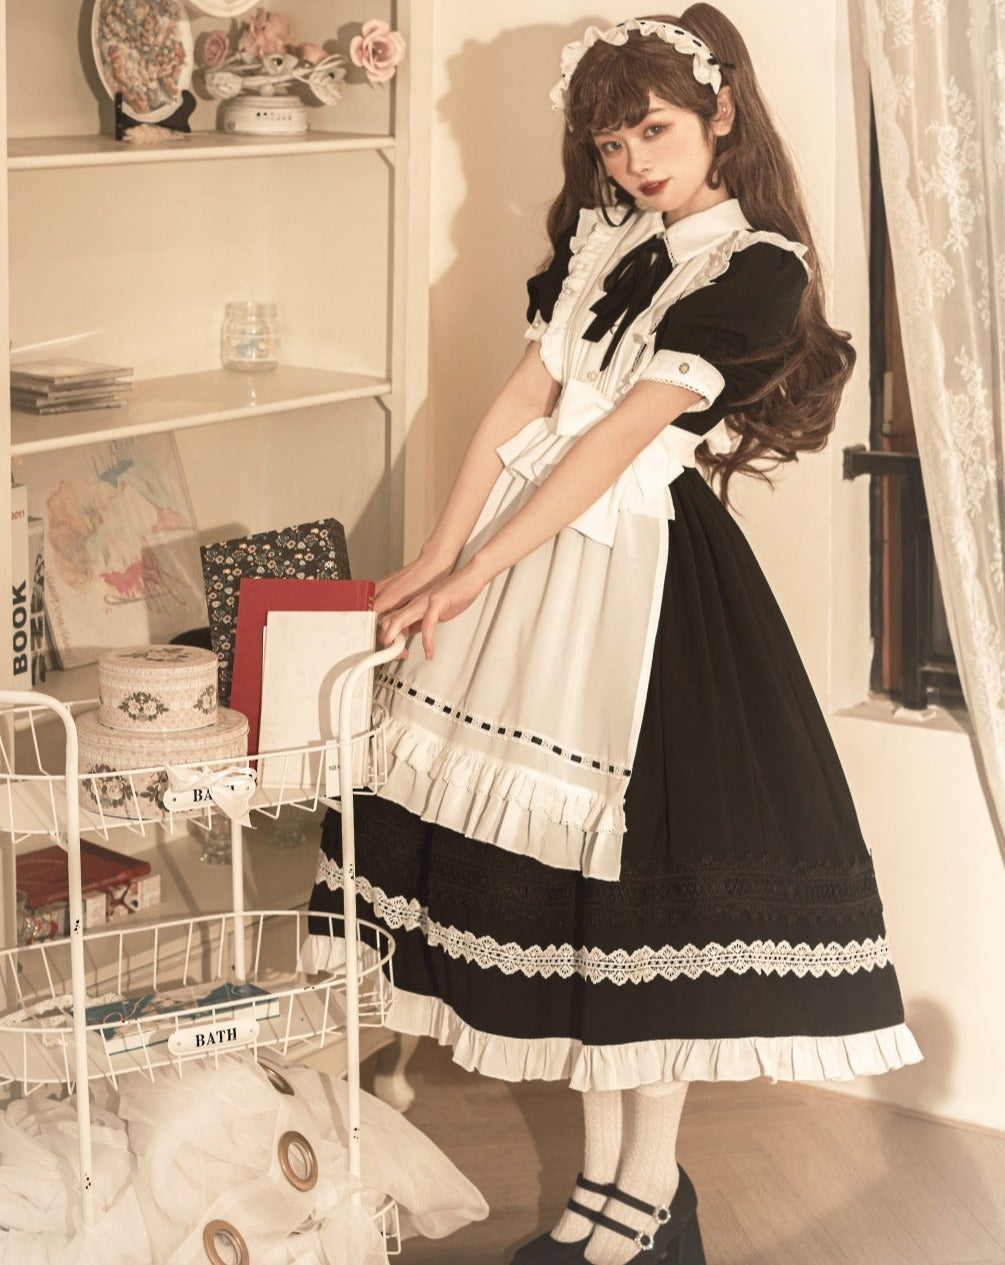 Classic Lolita short-sleeved dress with maid-style apron